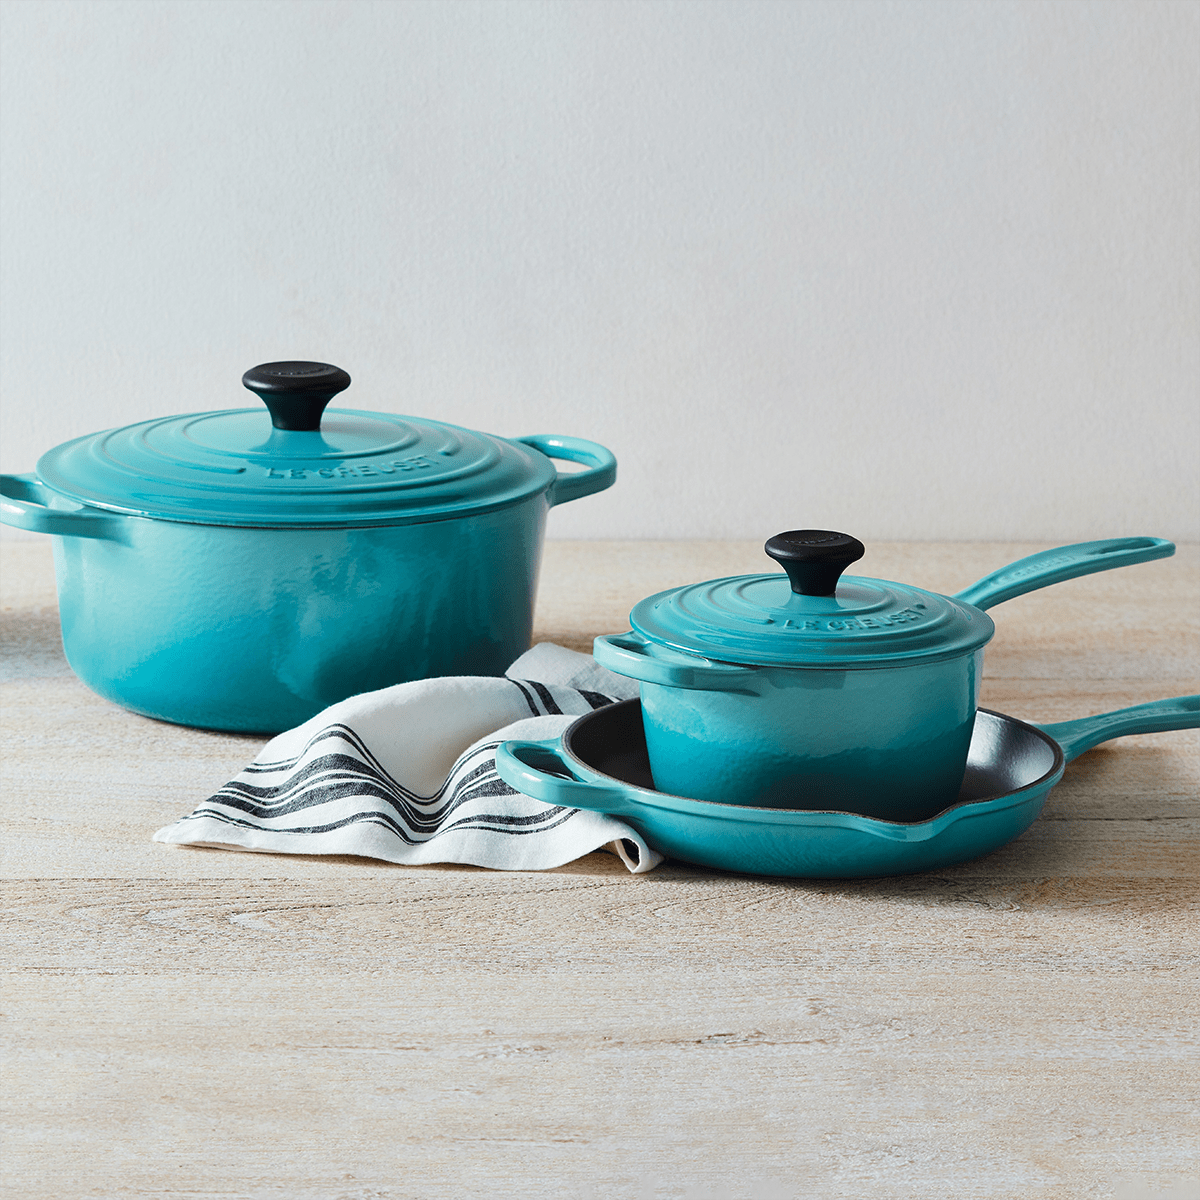 The Le Creuset Dutch Oven: Why the Cookware Icon Is Still So Popular - Eater